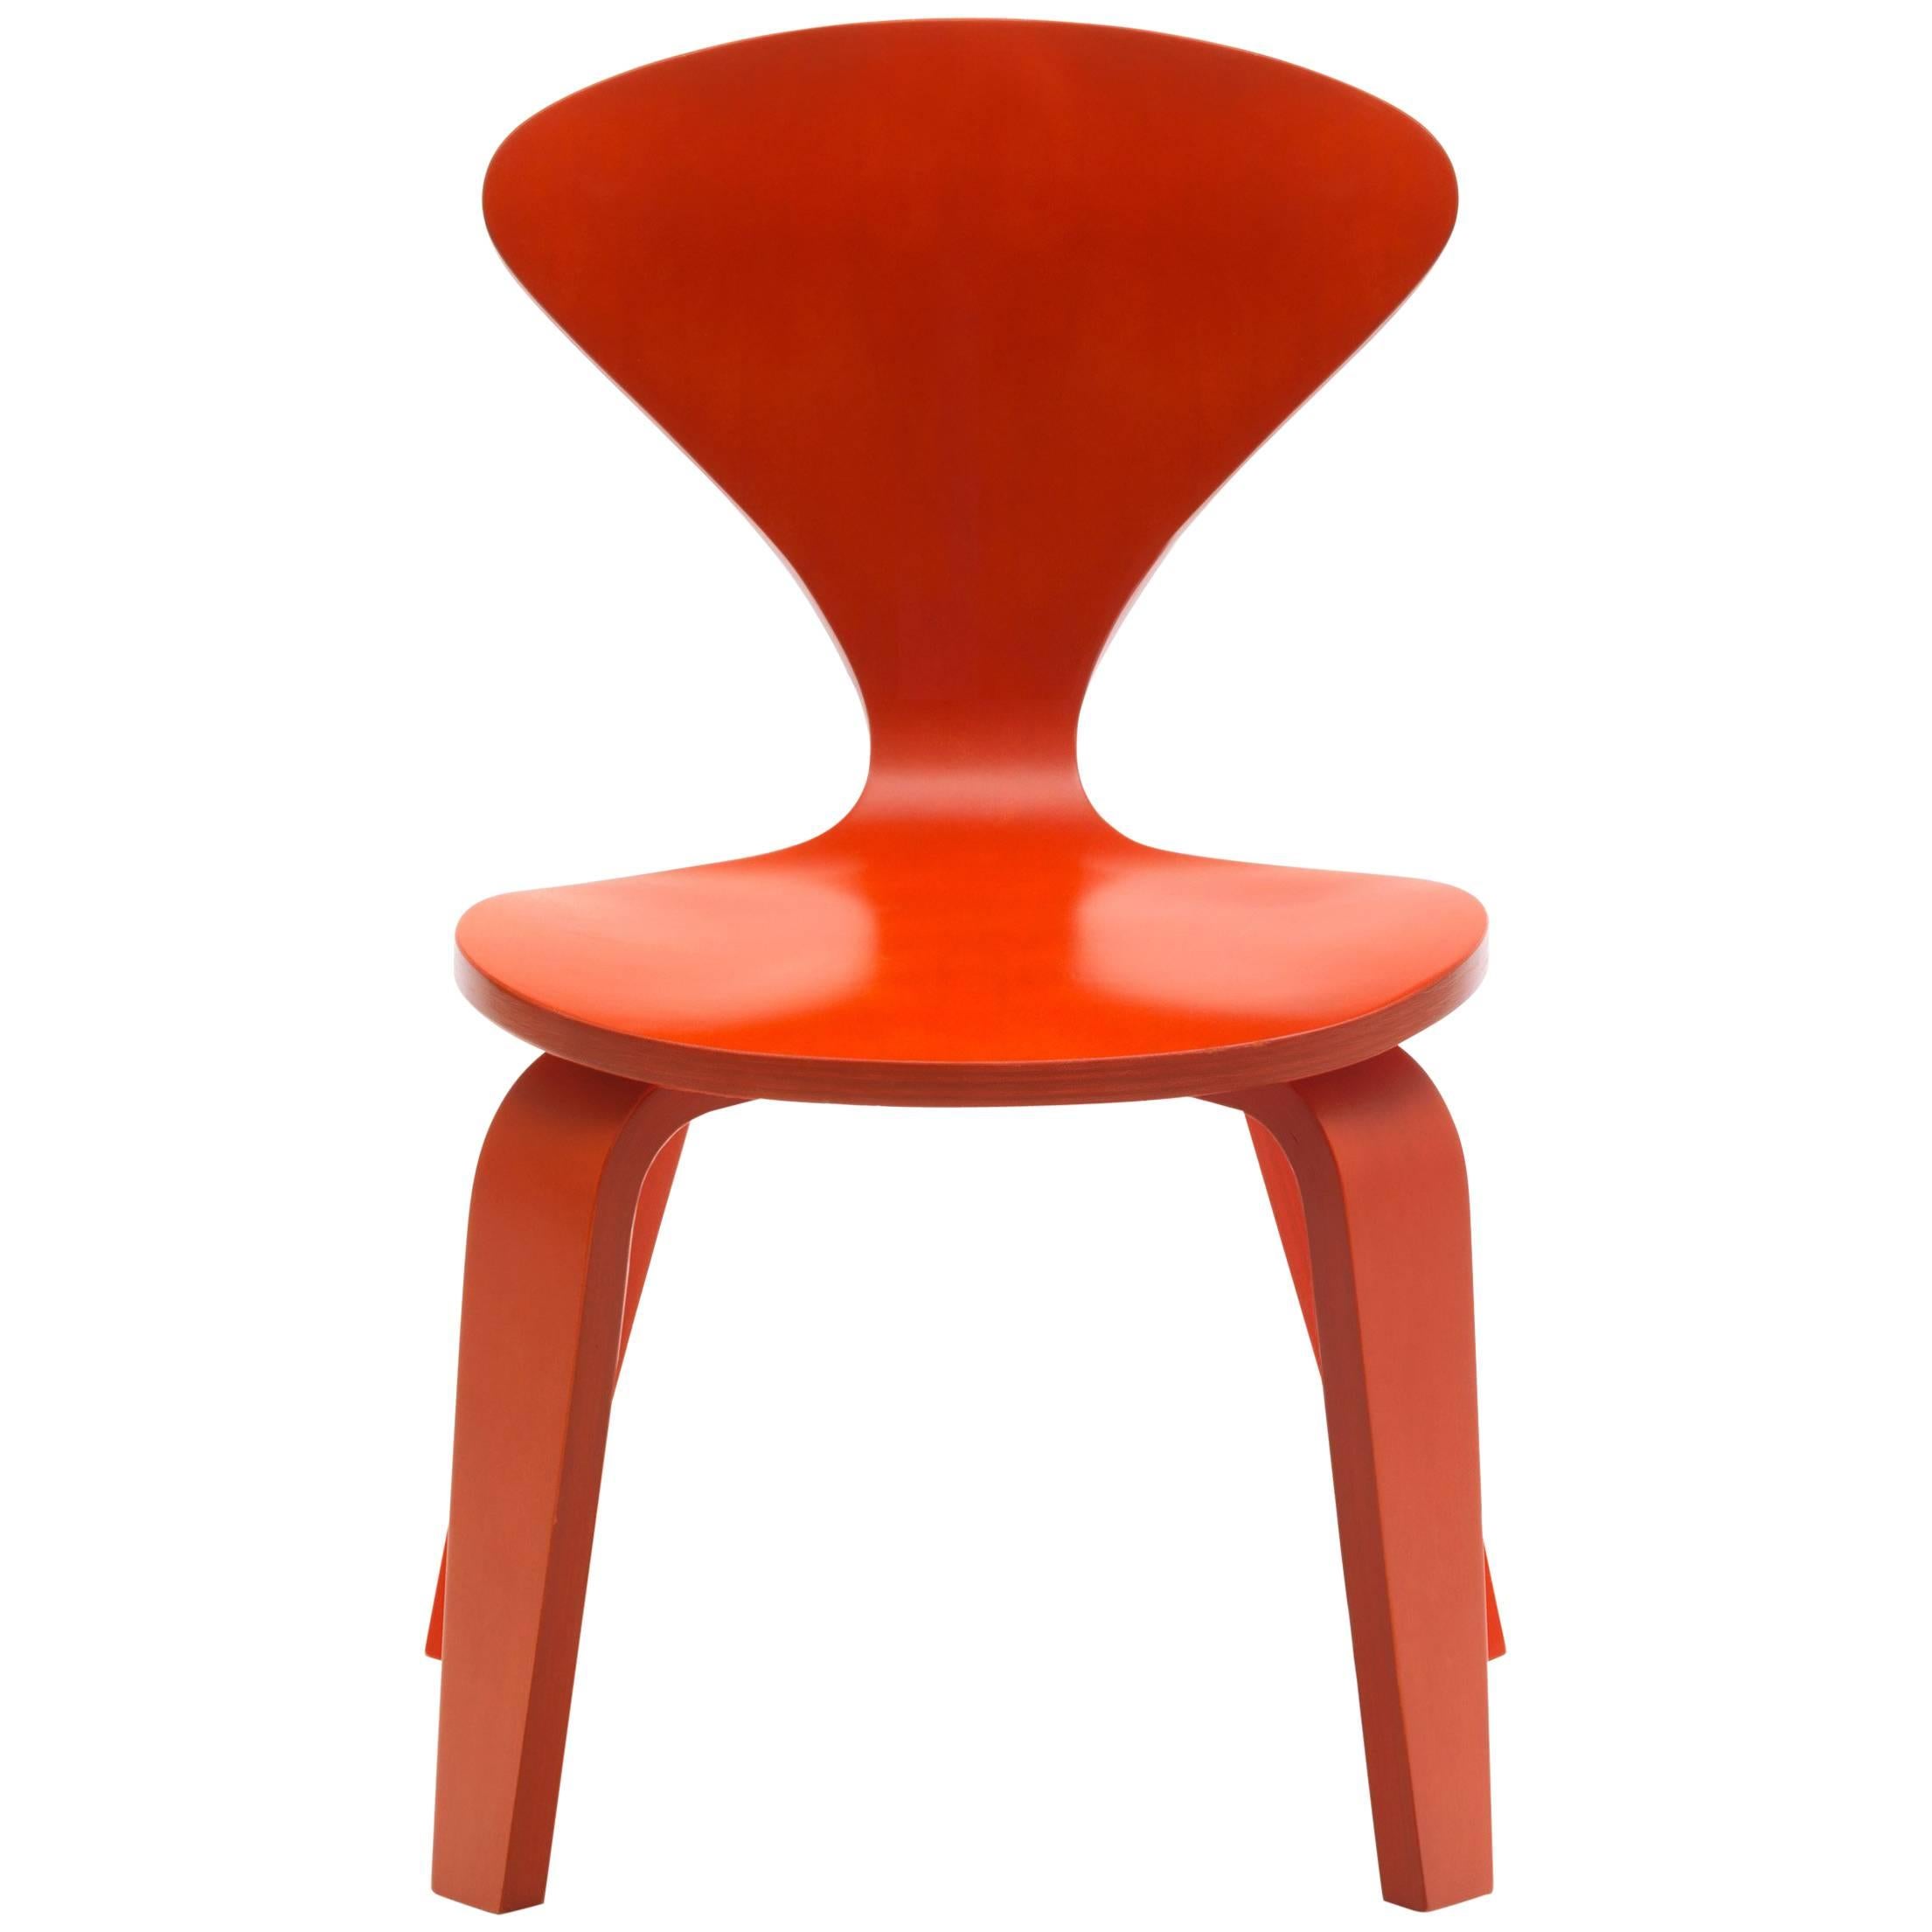 Cherner Child Chair by Benjamin Cherner in Orange, Contemporary, USA, 2007 For Sale